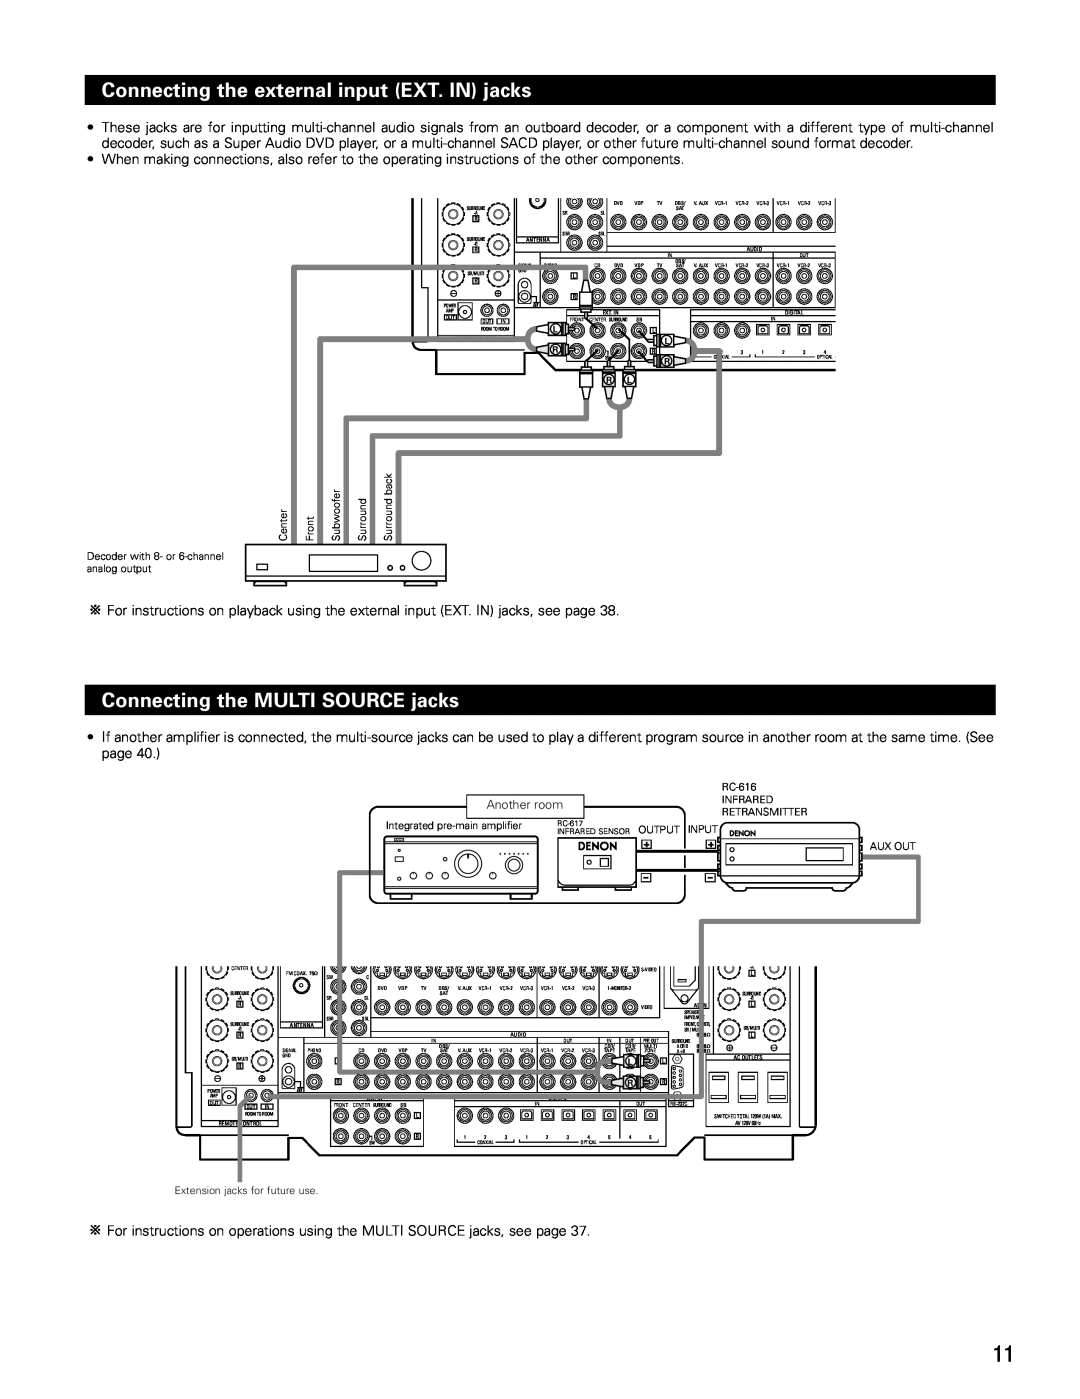 Denon AVR-4802 manual Connecting the external input EXT. IN jacks, Connecting the MULTI SOURCE jacks, Another roomINFRARED 